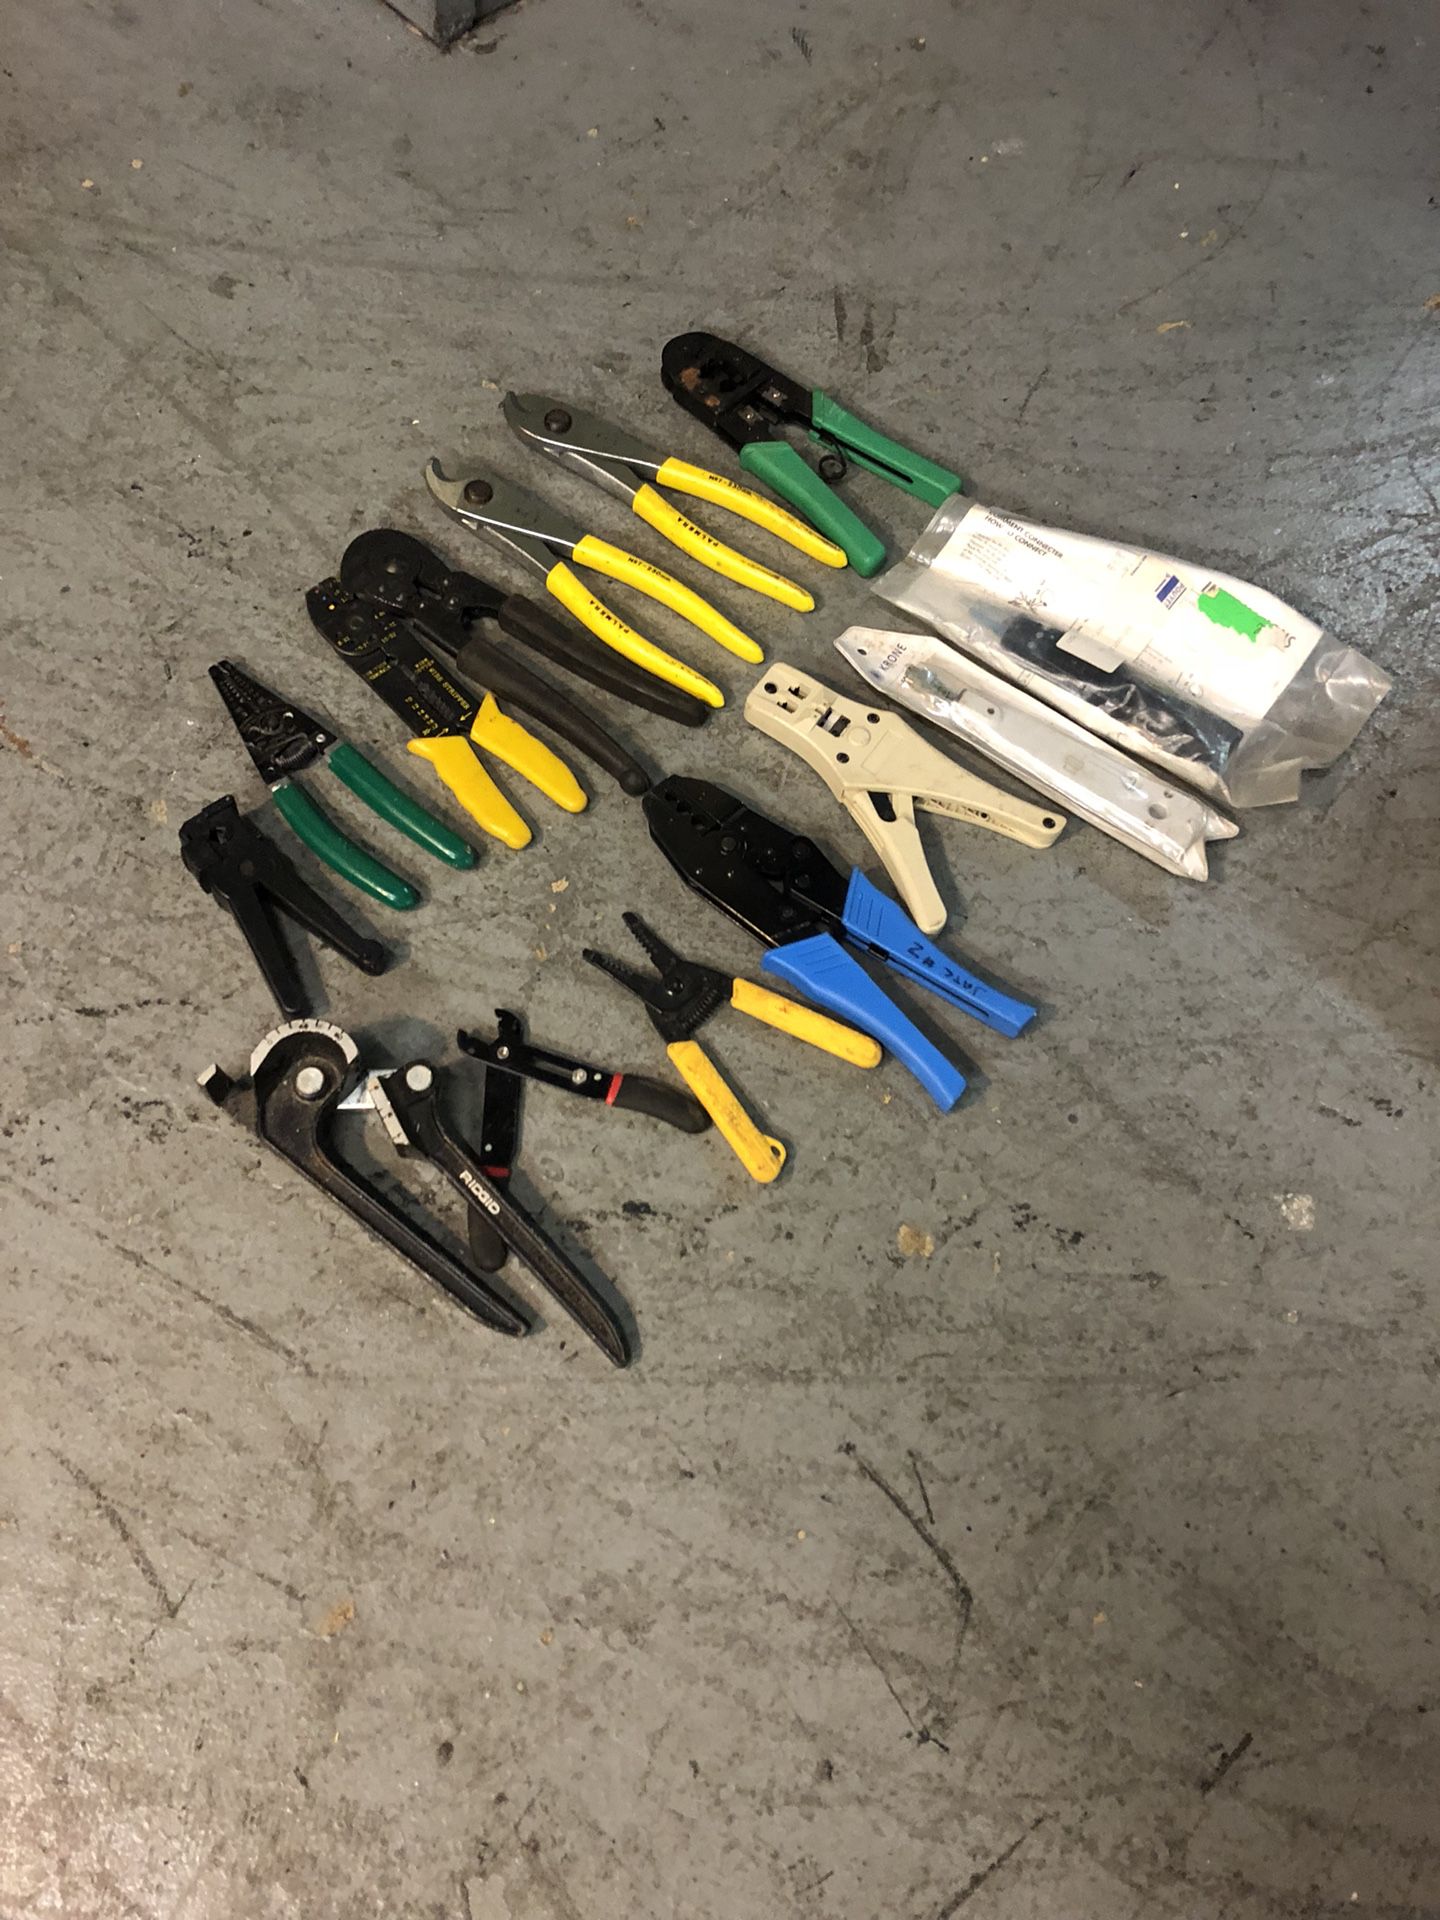 Assorted electrical tools